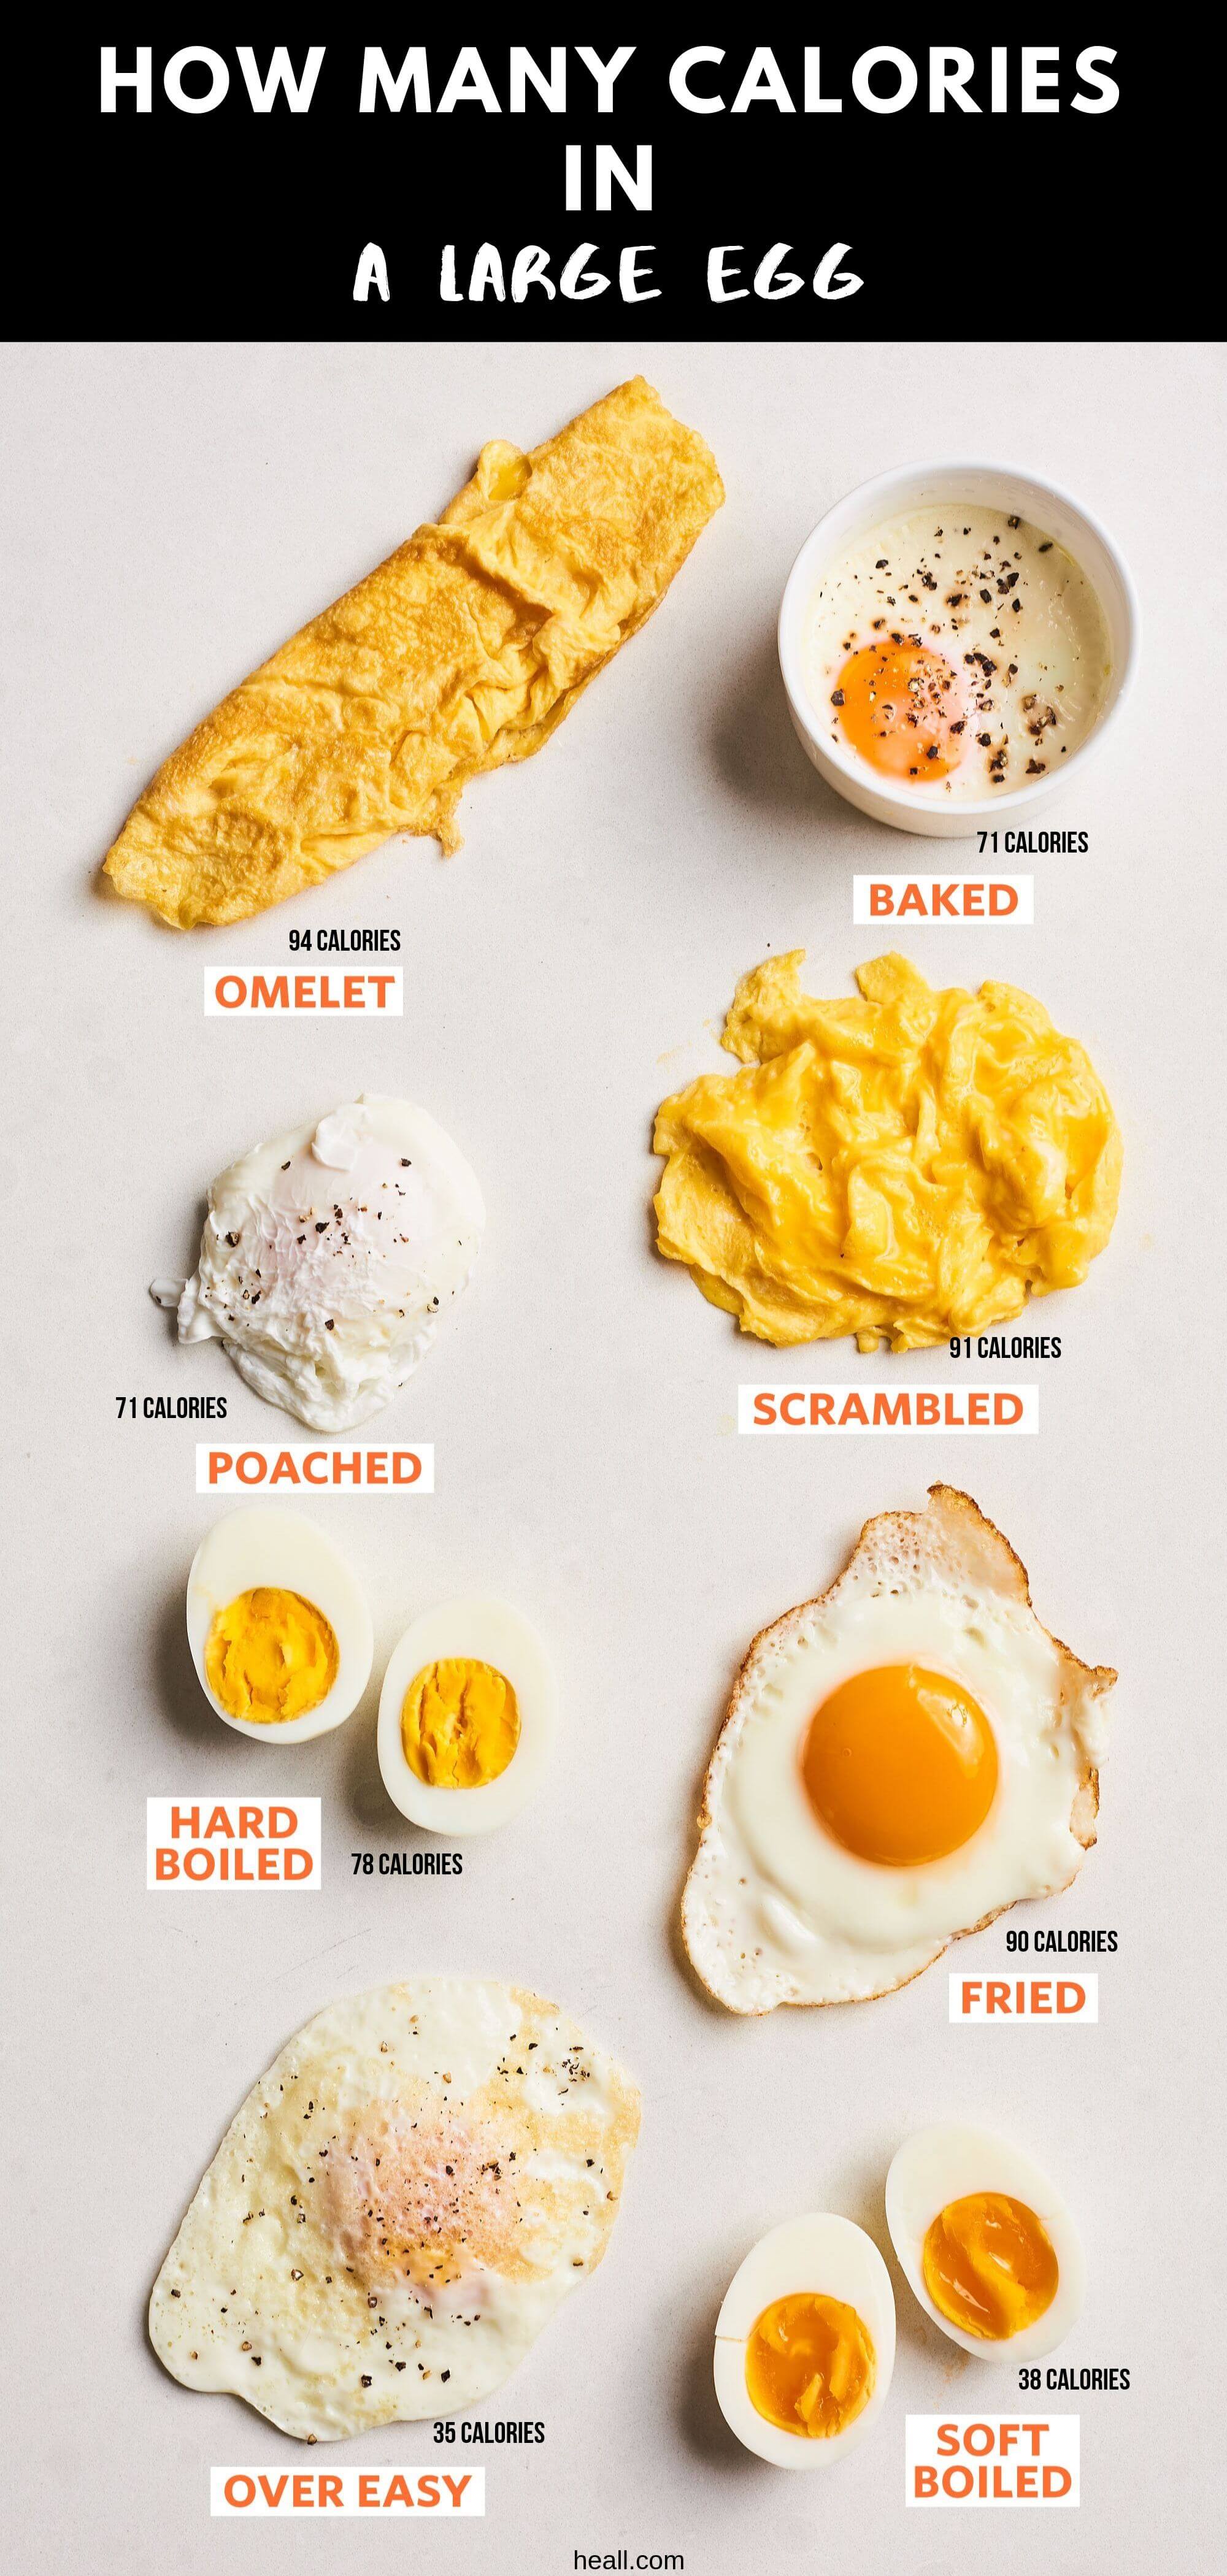 how many calories are in a egg